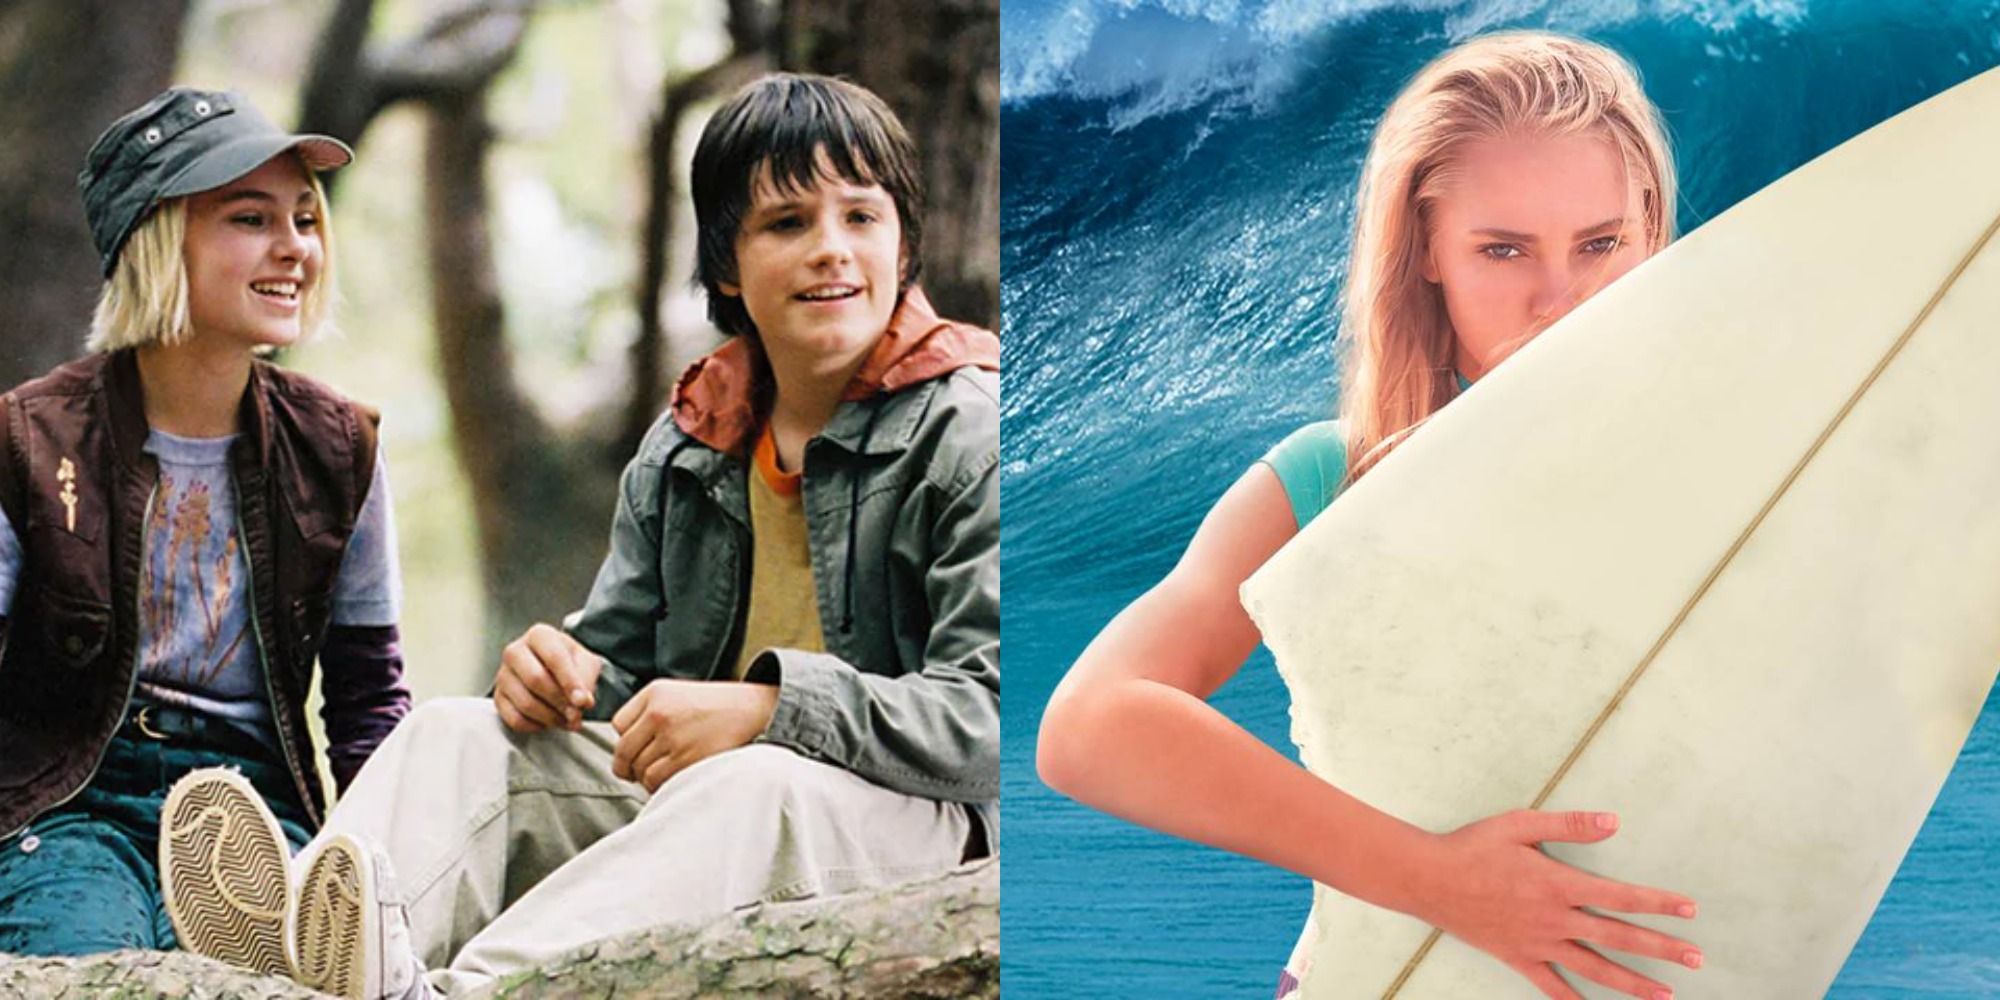 Split image showing scenes from Bridge to Terabithia and Soul Surfer